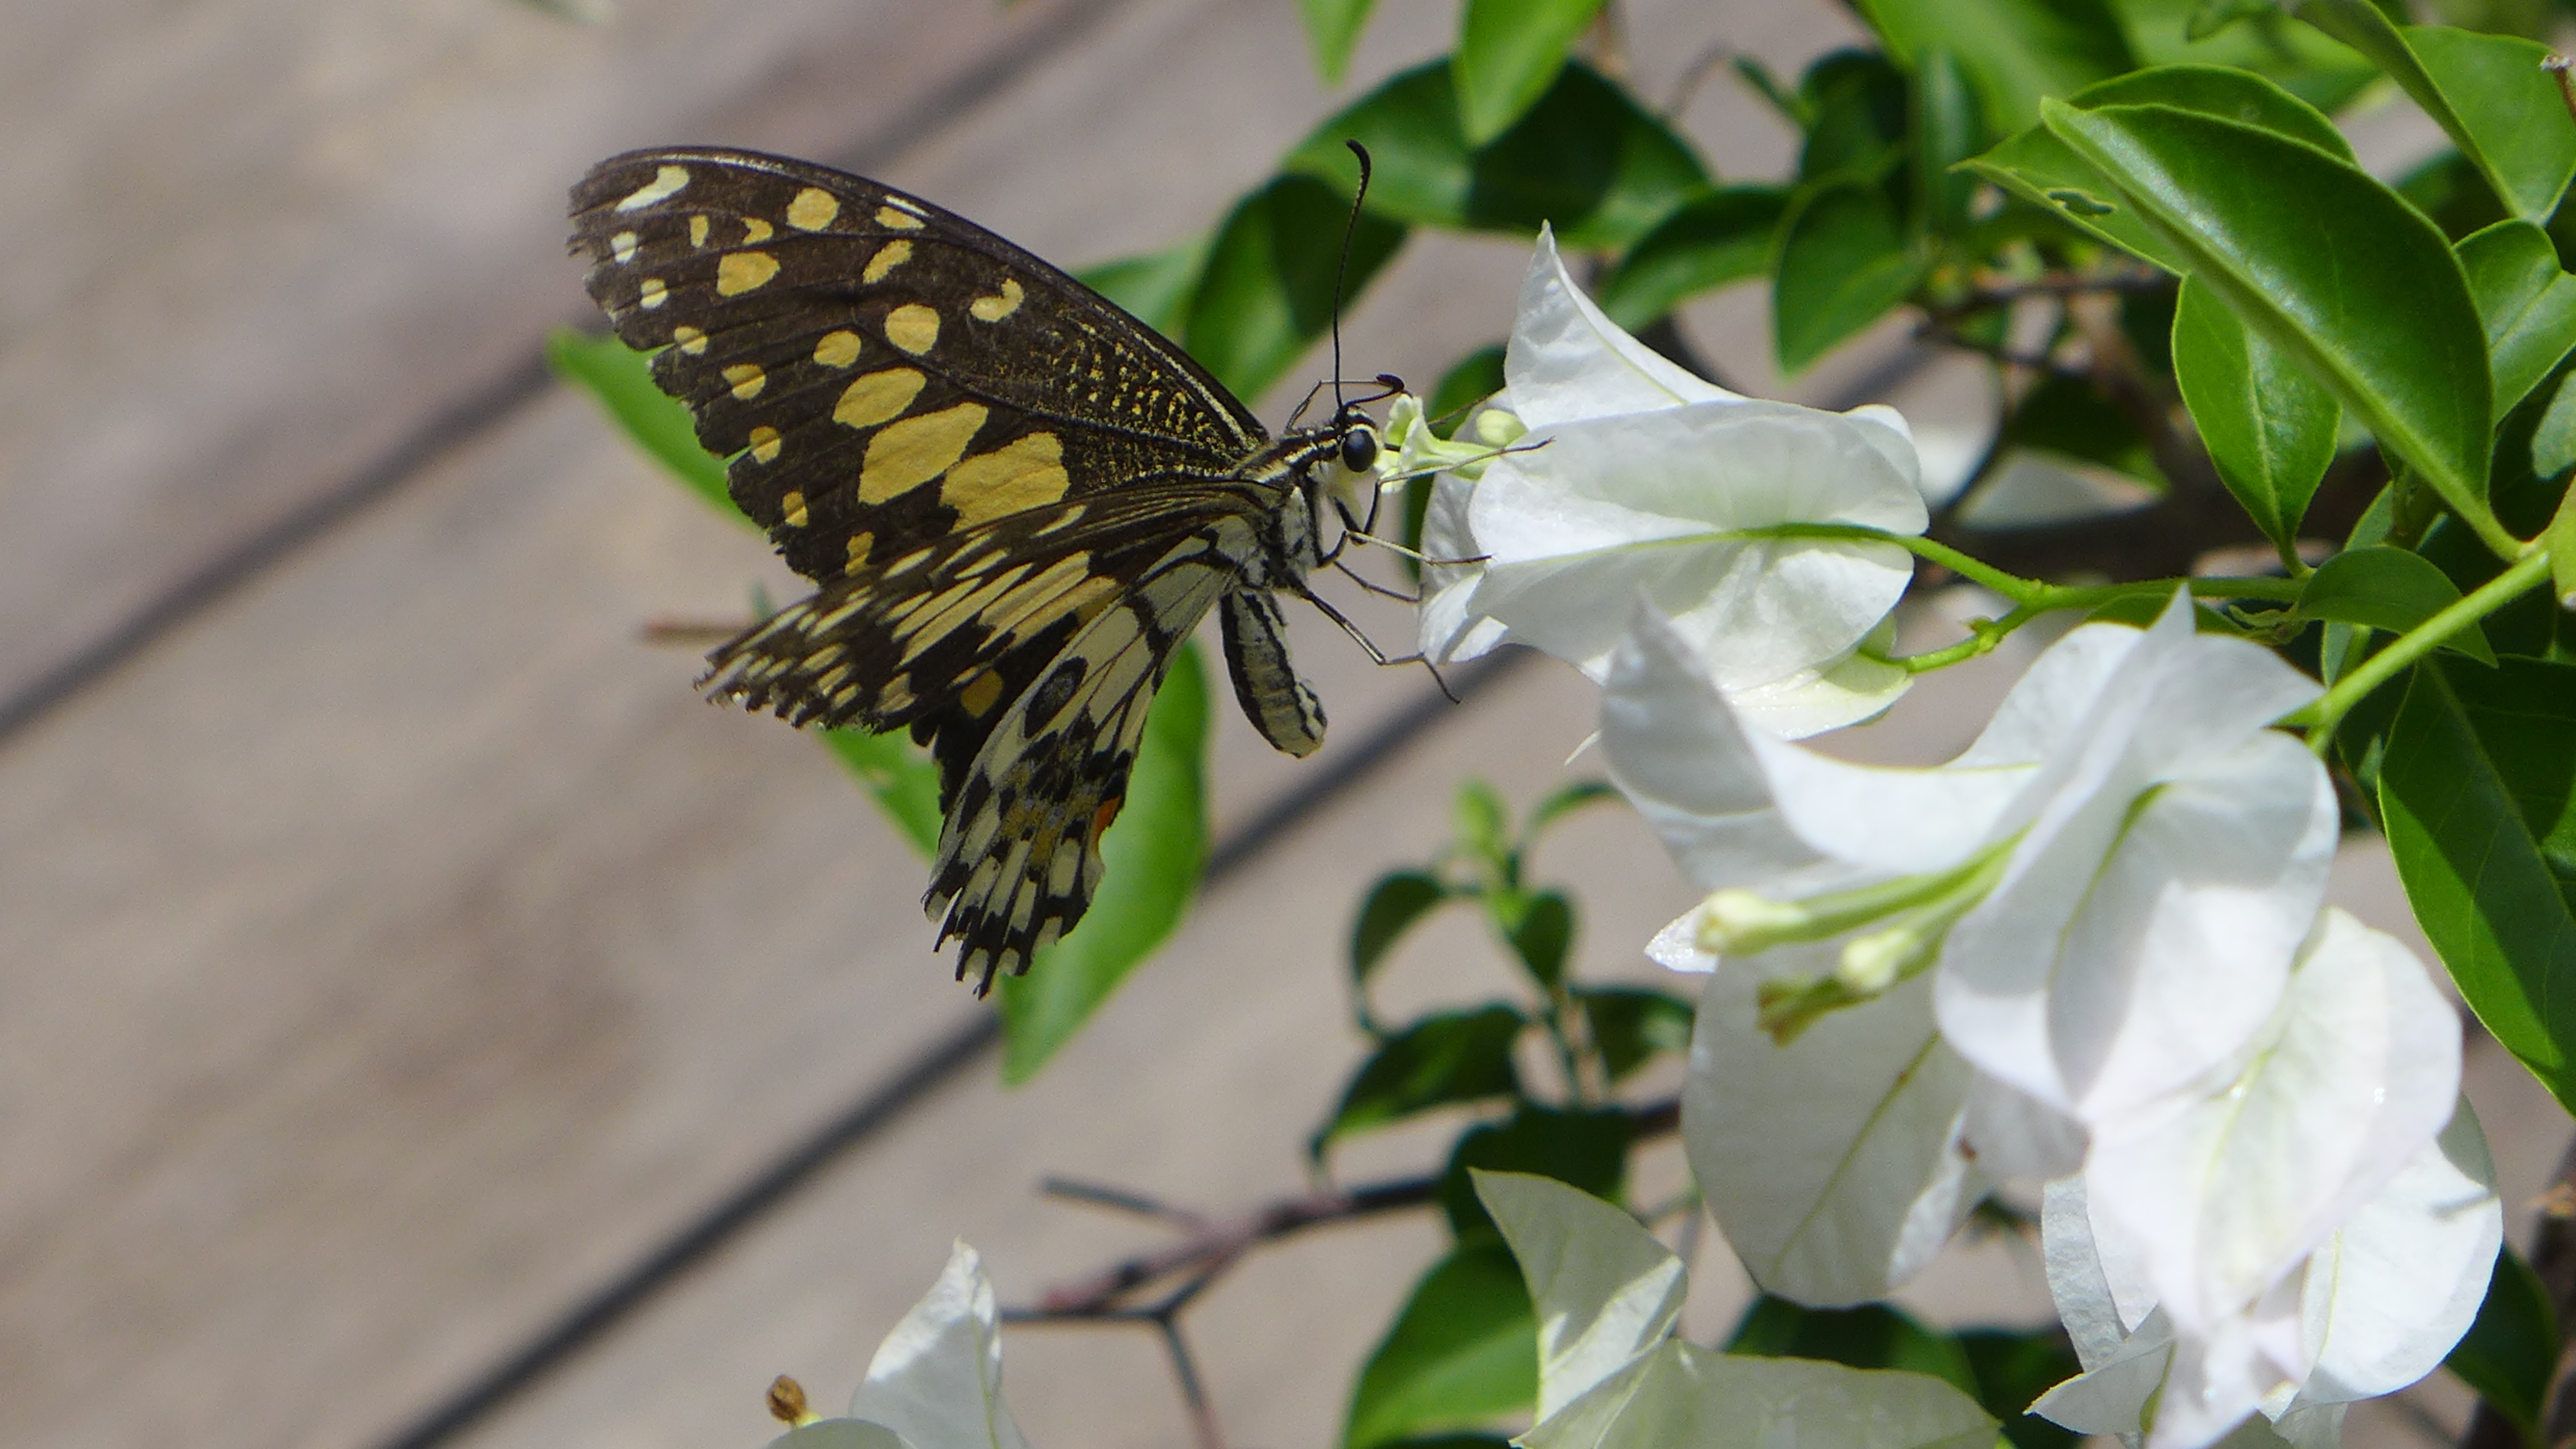 yellow and black spotted butterfly gets nectar from white flowers